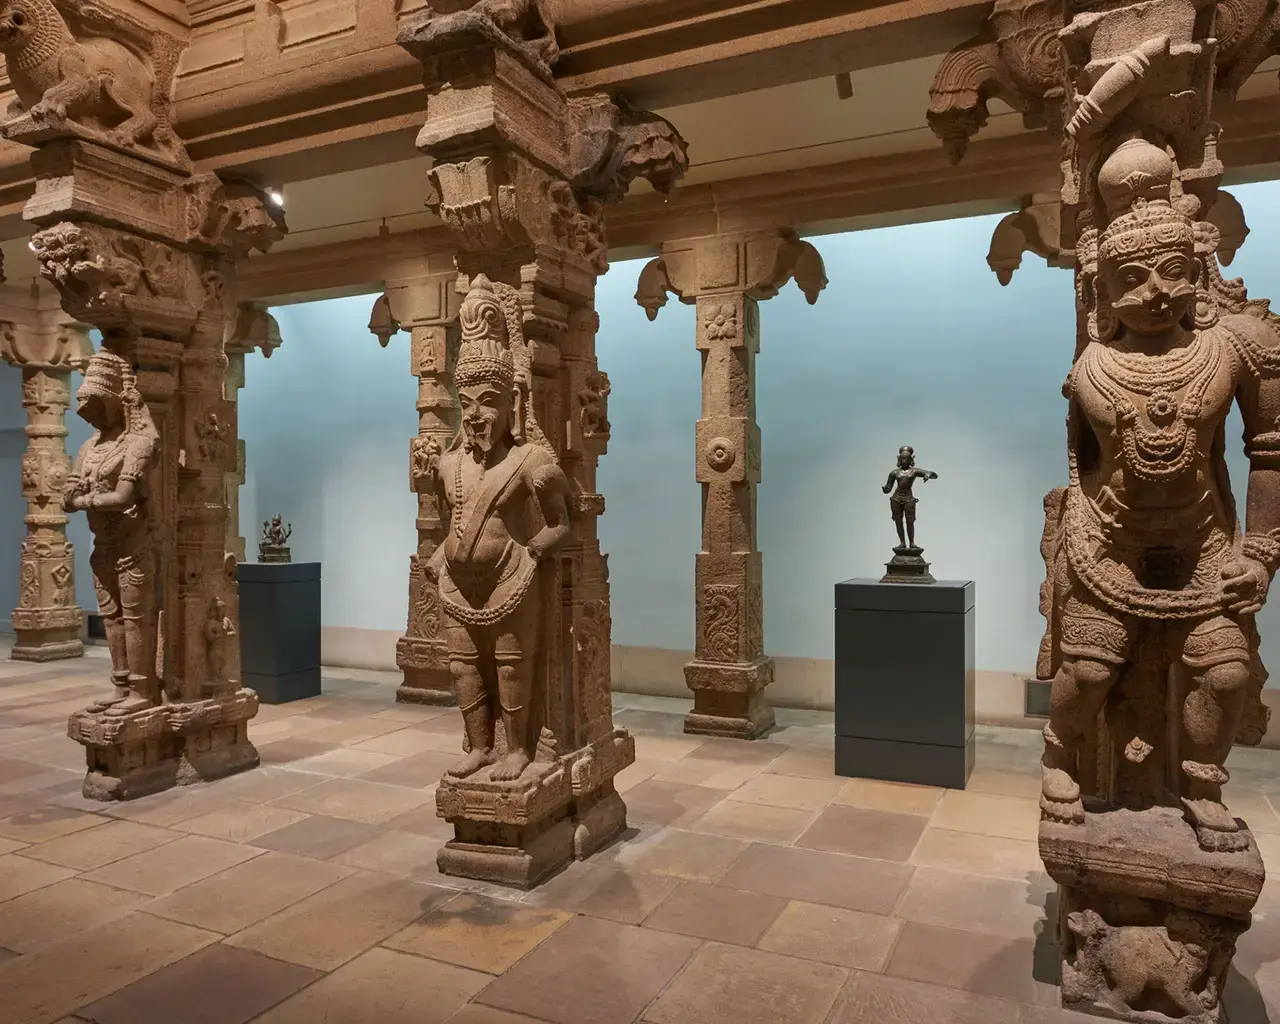 Hall from the Madanagopalaswamy Temple, Madurai, South India, circa 1560, granitic stone. Gift of Susan Pepper Gibson, Mary Gibson Henry and Henry C. Gibson in memory of Adeline Pepper Gibson, 1919-714. Photo by Joseph Hu.